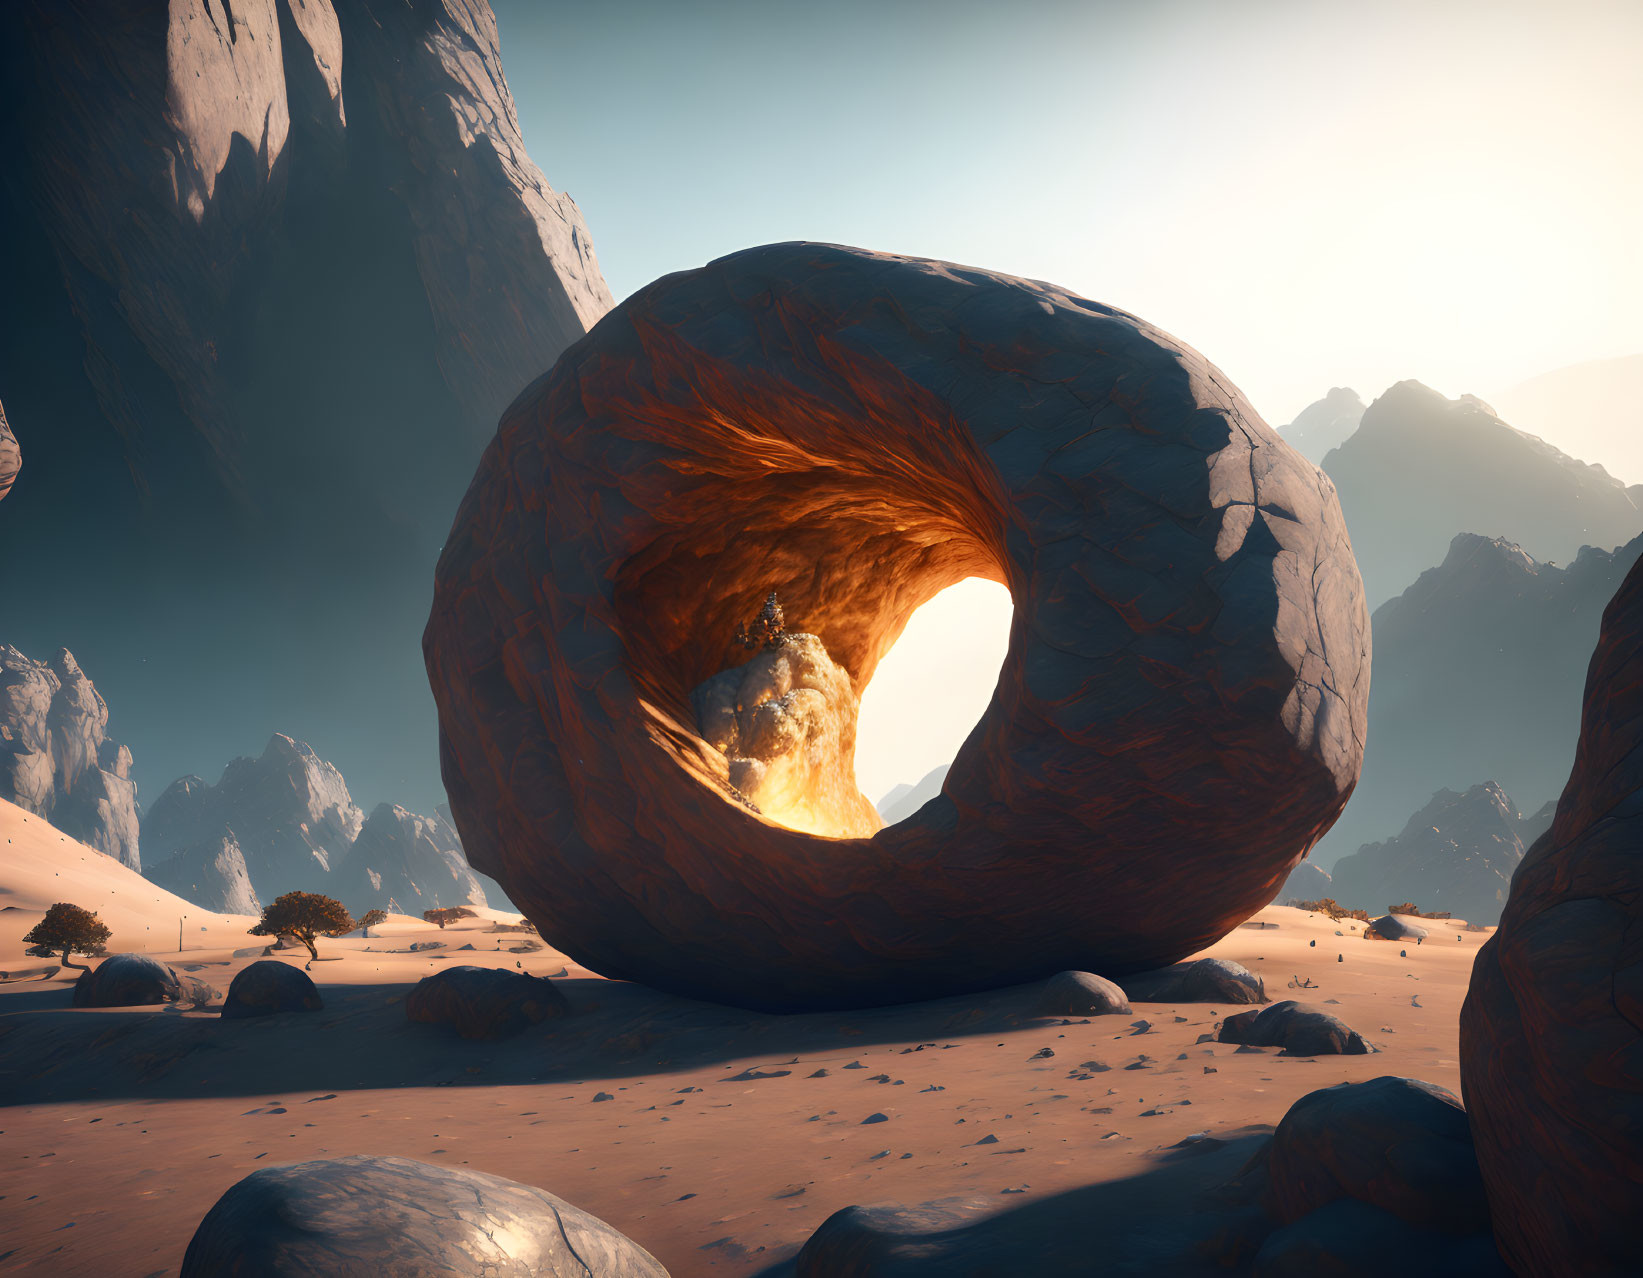 Surreal desert landscape with glowing torus rock formation